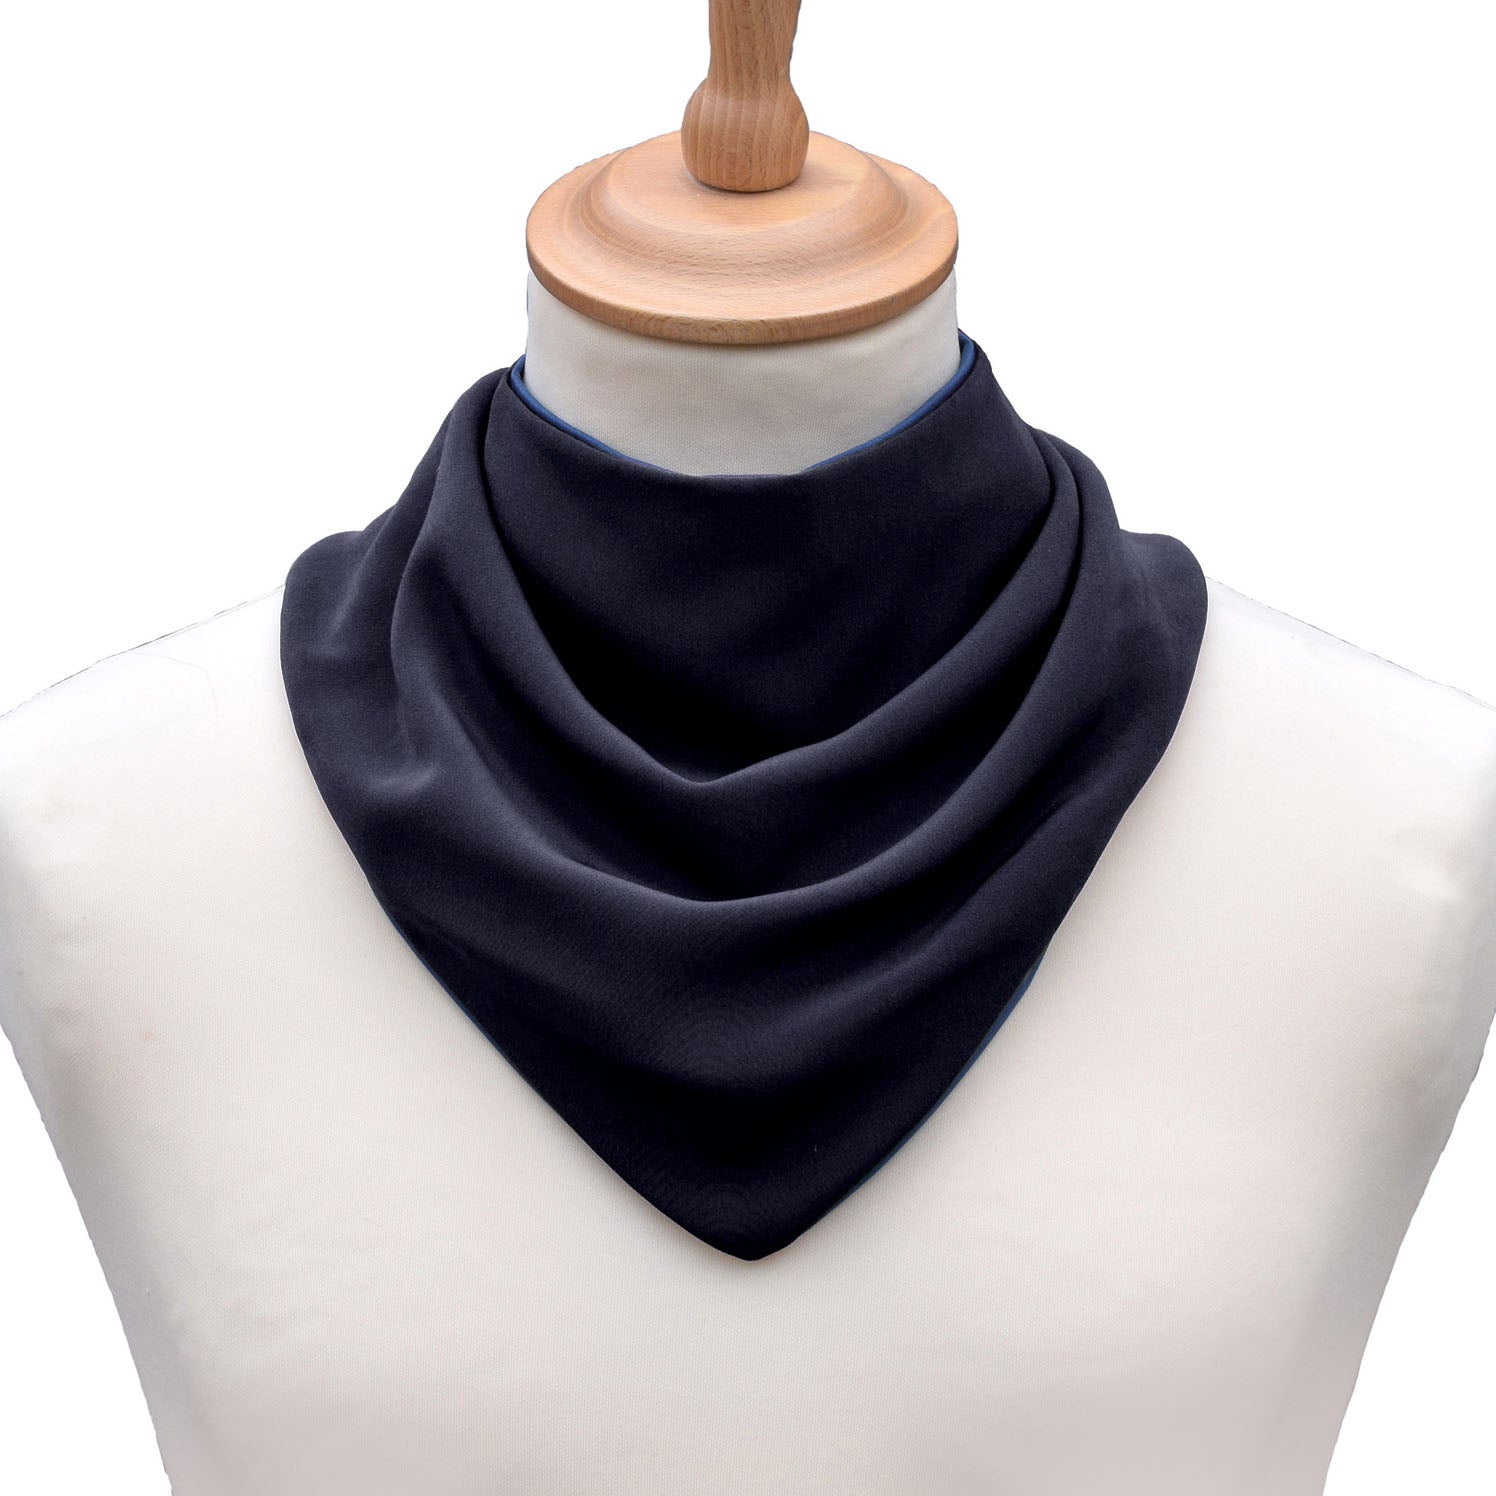 CareDesign_neckerchief_for_older_children_and_adults_with_special_needs_dribble_bib_charcoal_front